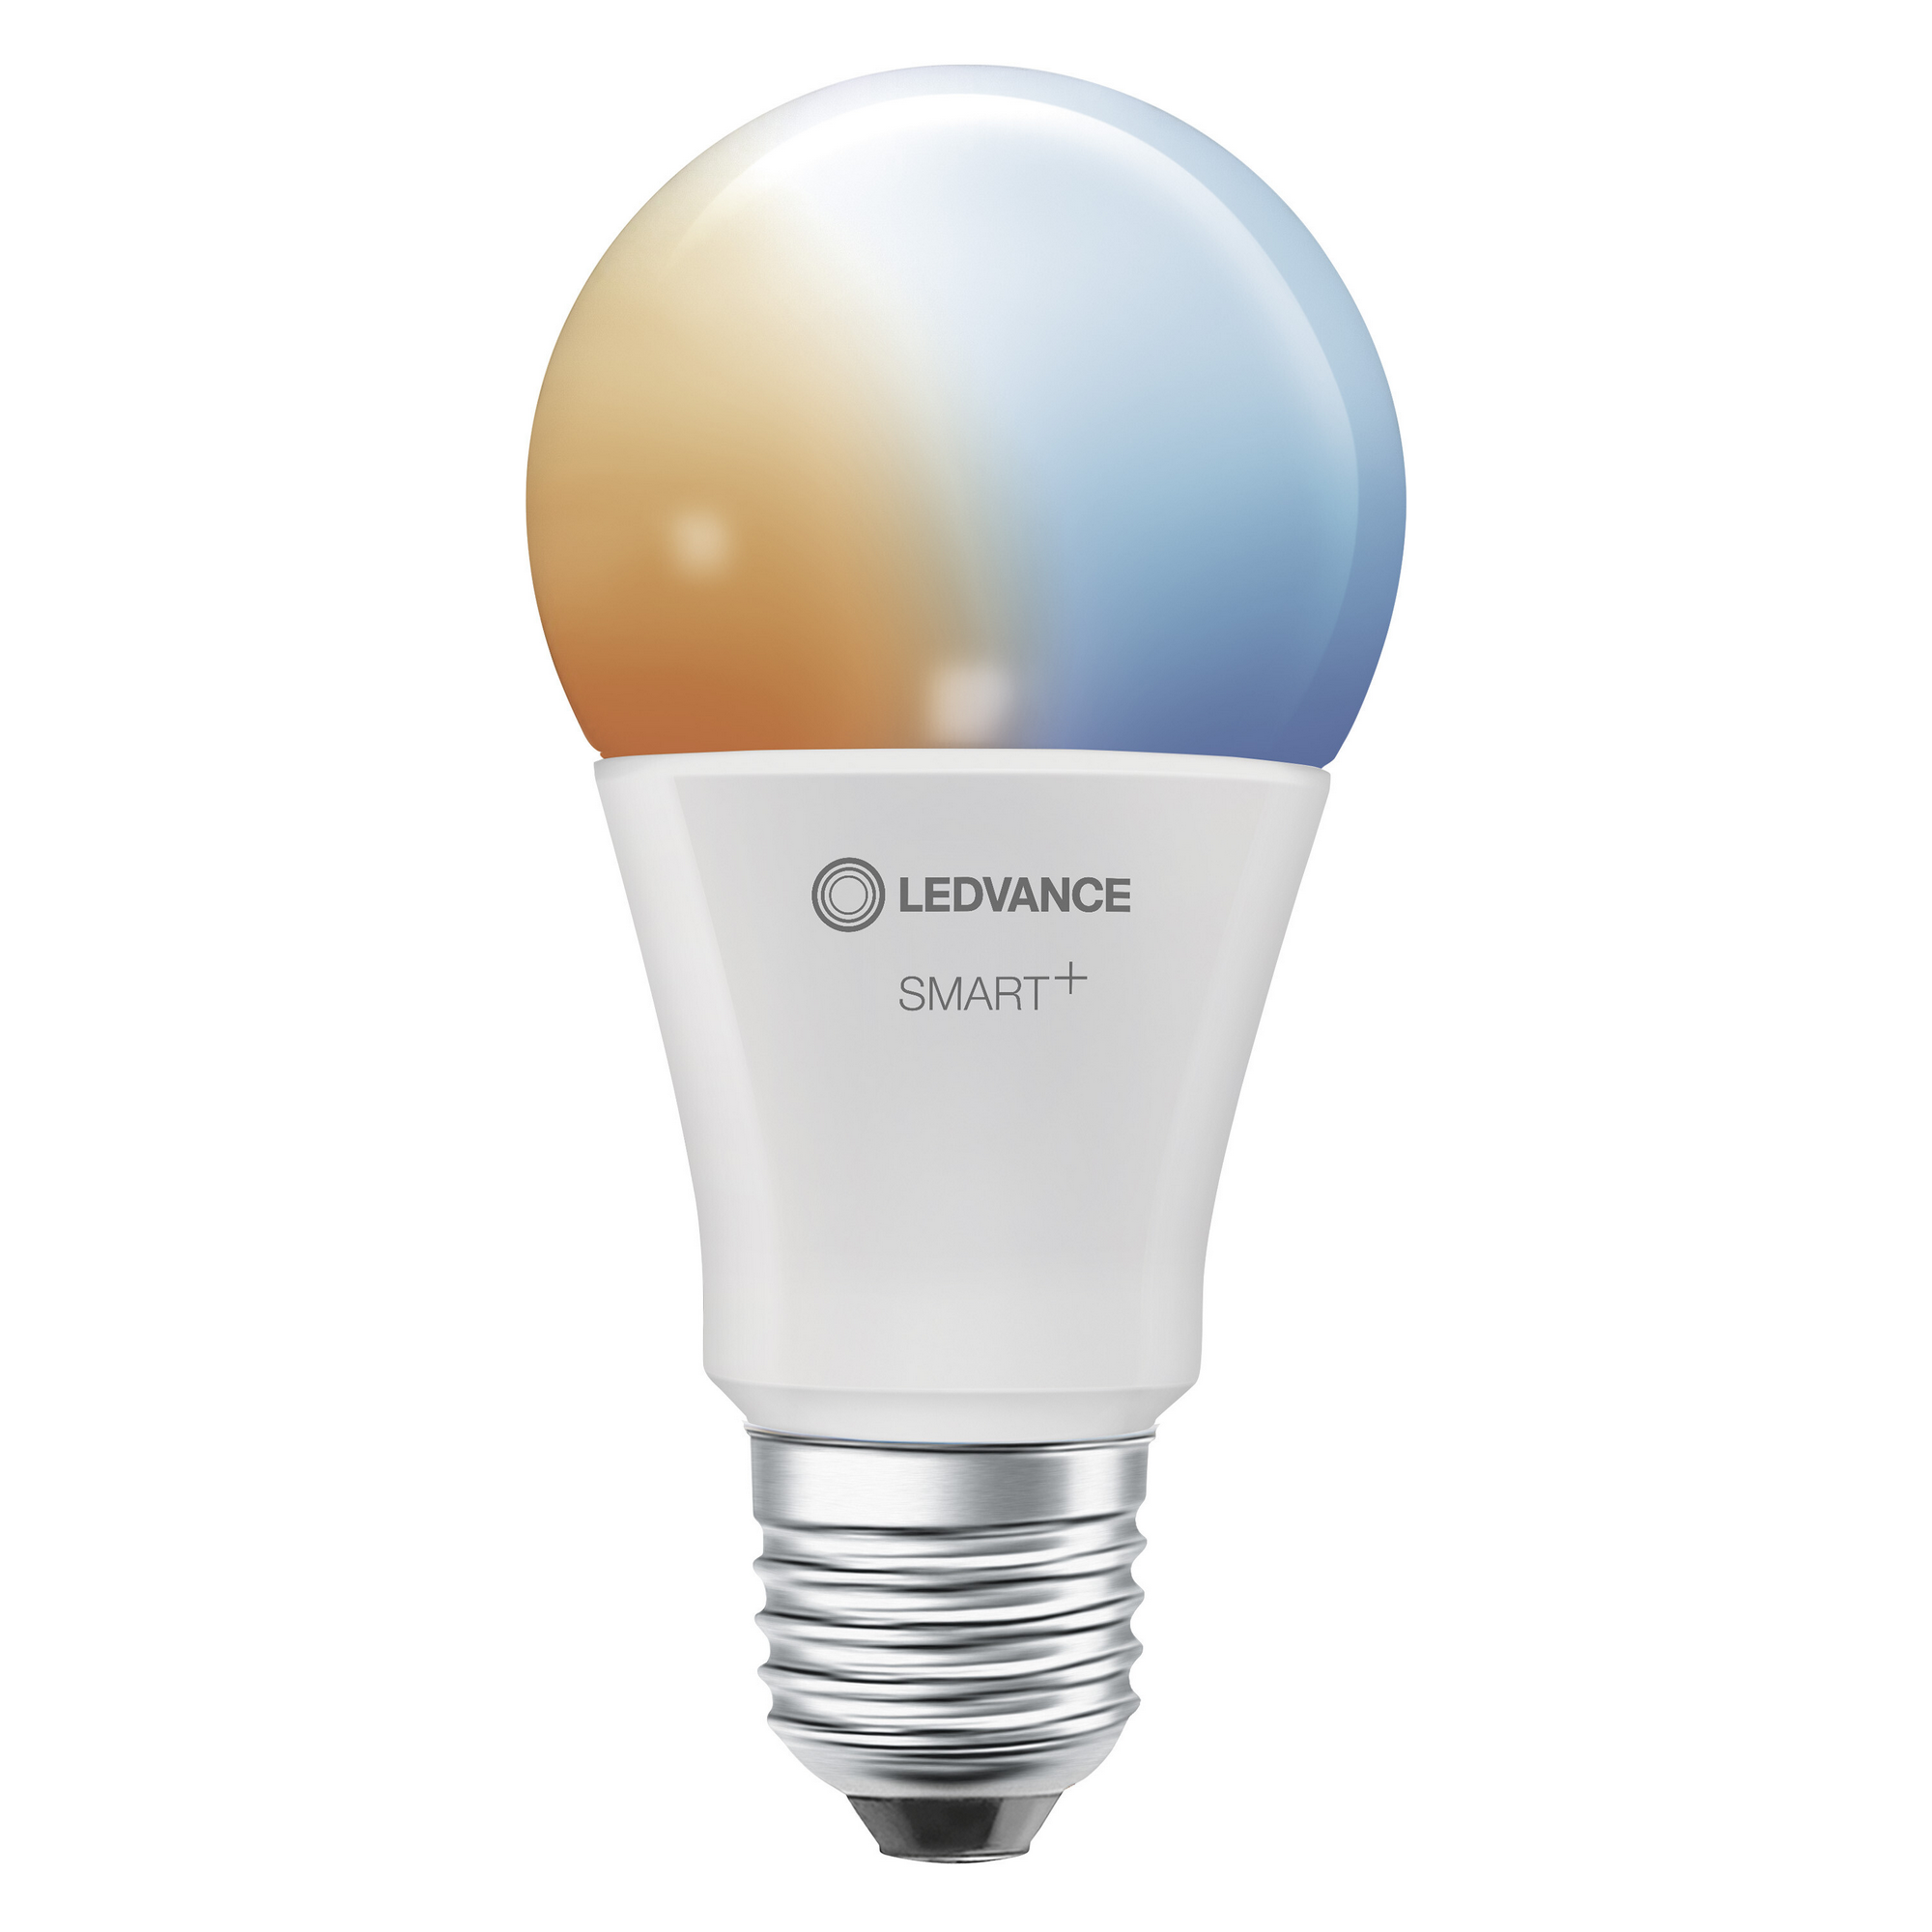 LED-Lampe 'Smart+ WiFi CLA' warm/kaltweis 14 W E27 1521 lm, dimmbar + product picture